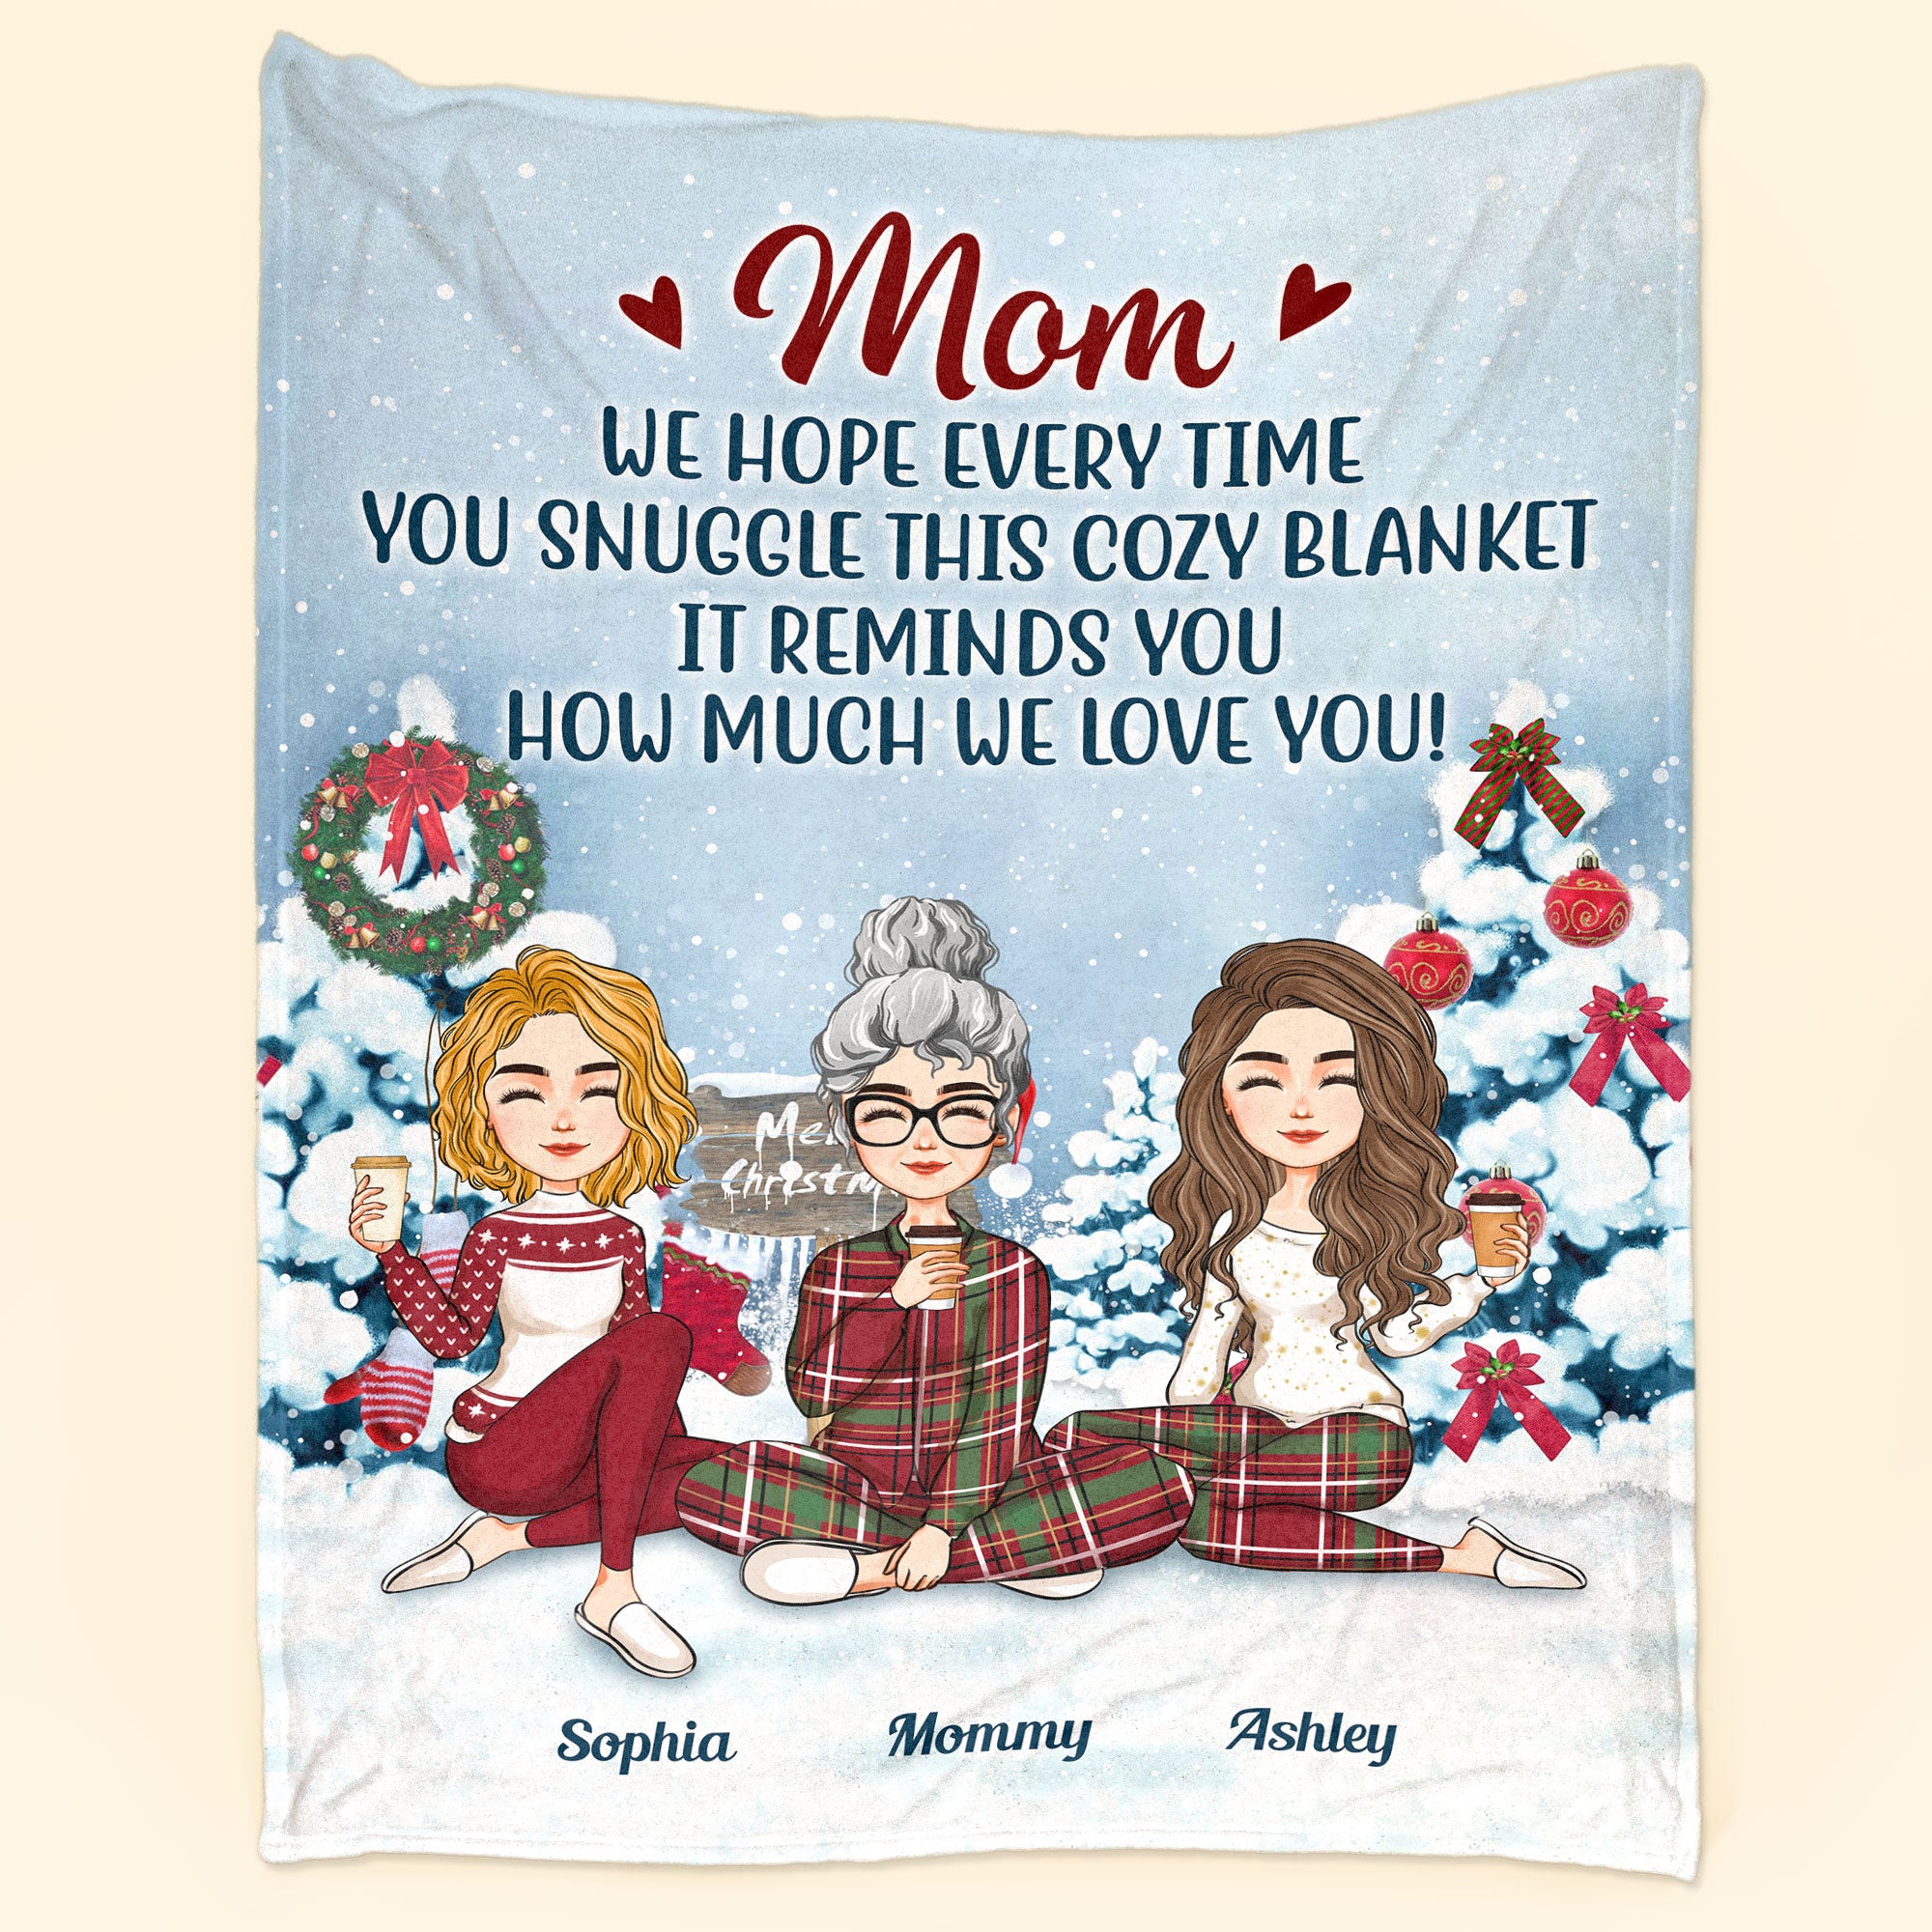 To My Mom Every Time You Snuggle This Blanket - Personalized Blanket –  Macorner